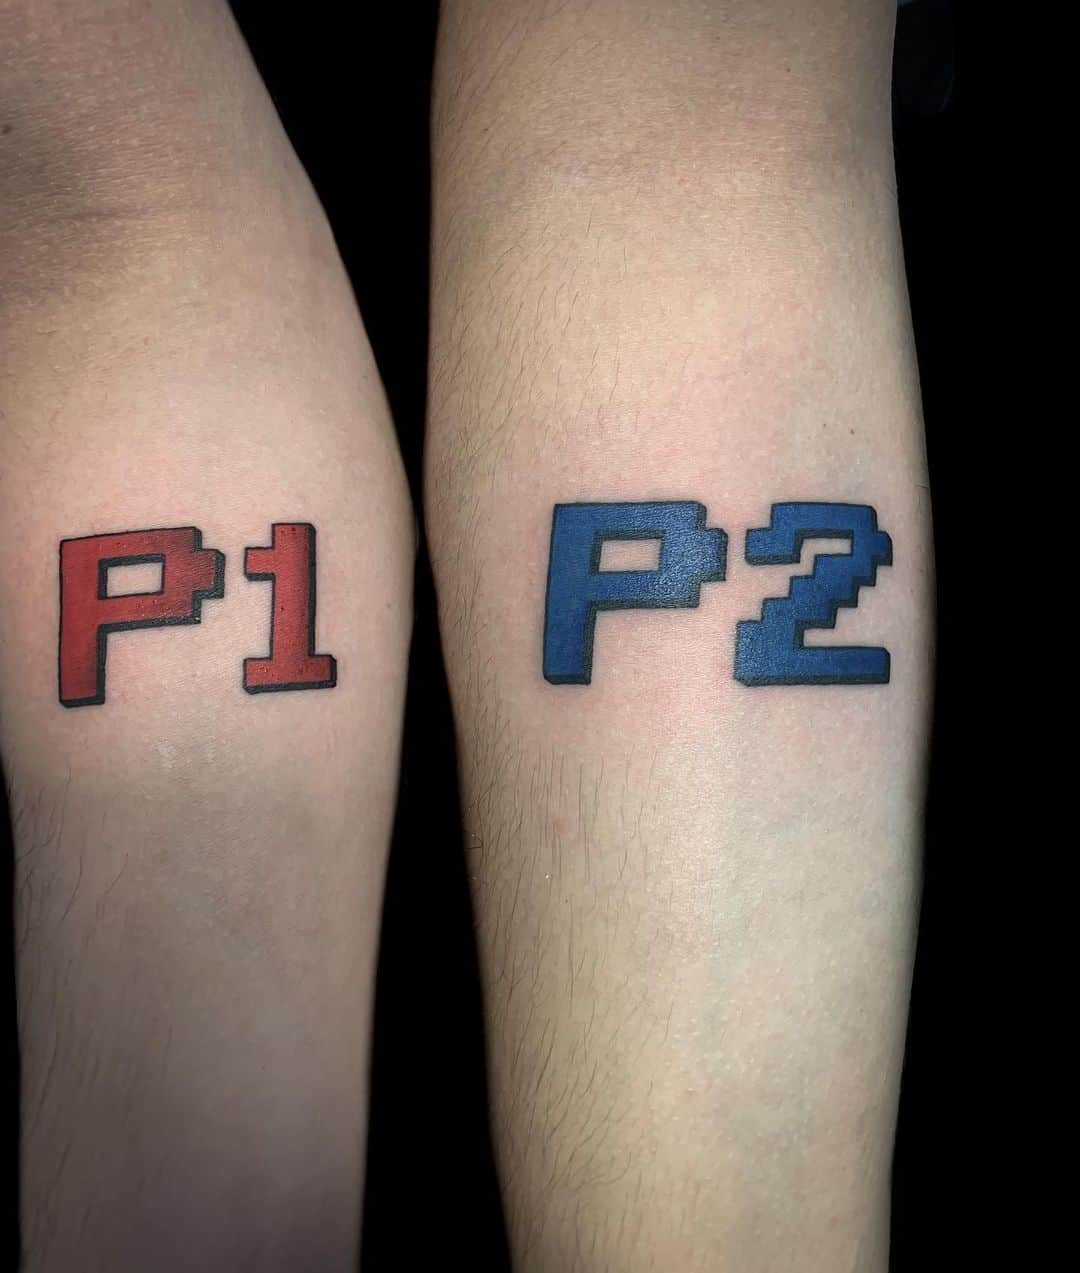 Tattoo trend among Gen Z users on TikTok sparks outrage